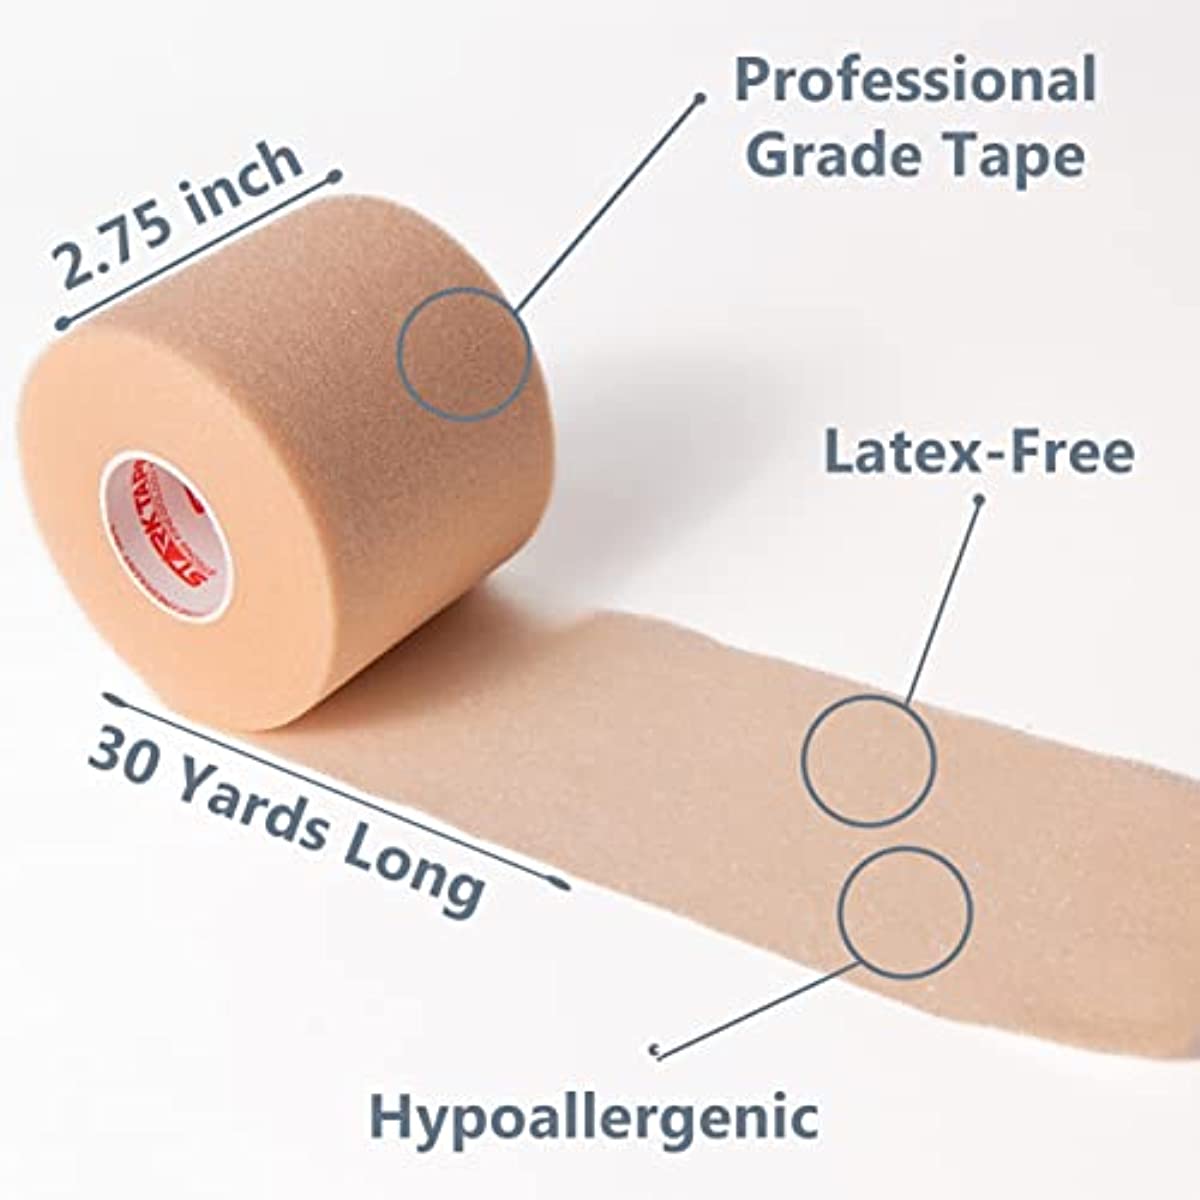 Starktape Underwrap Athletic Foam Sport Tape. Pre Wrap Bandage Taping Supplies for Ankle Wrists Hands Knees. Hair Tie, Headband, Patellar Support. 2 and 4 Prewrap Rolls Beige, 2.75 Inch by 30 Yards